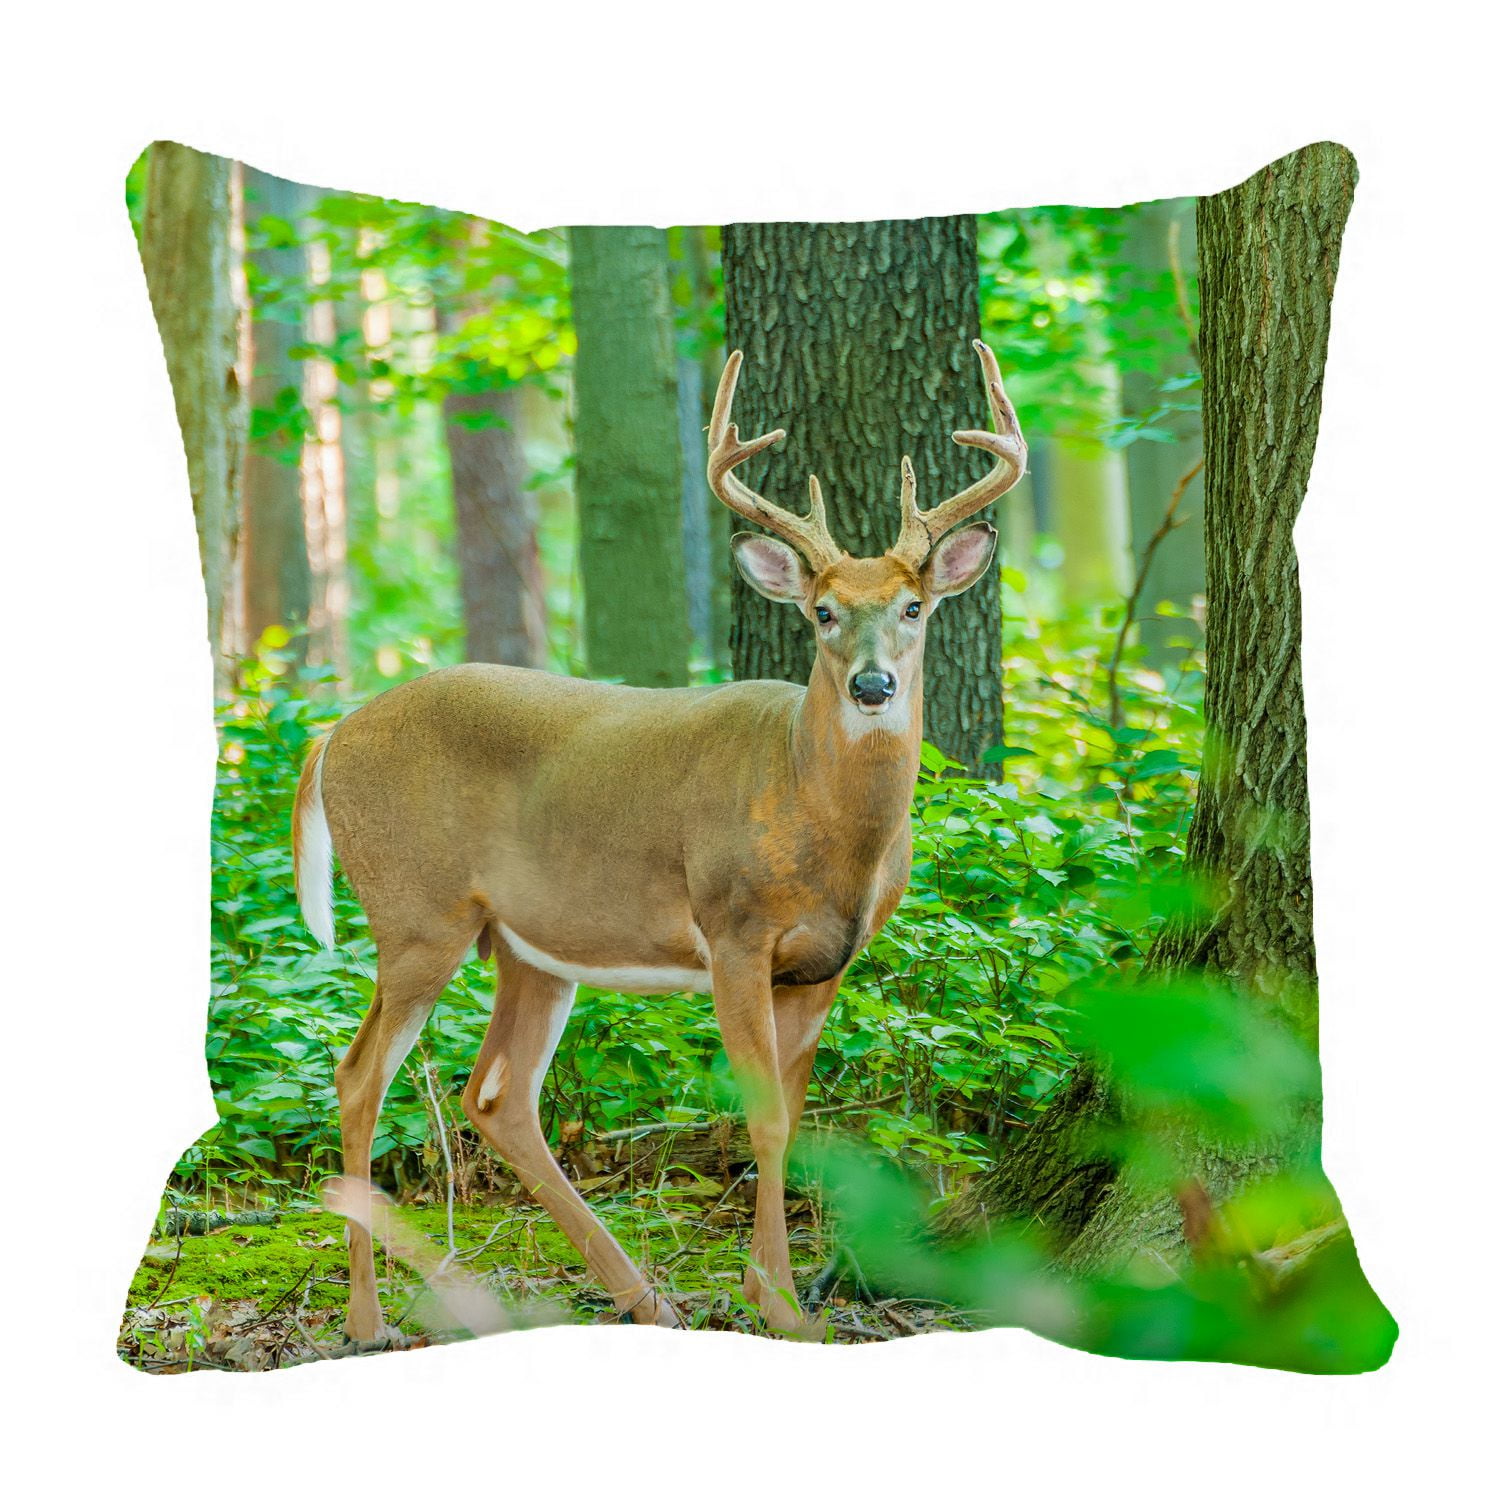 PHFZK Woodland Pillow Case, Whitetail Deer in the Jungle Pillowcase ...